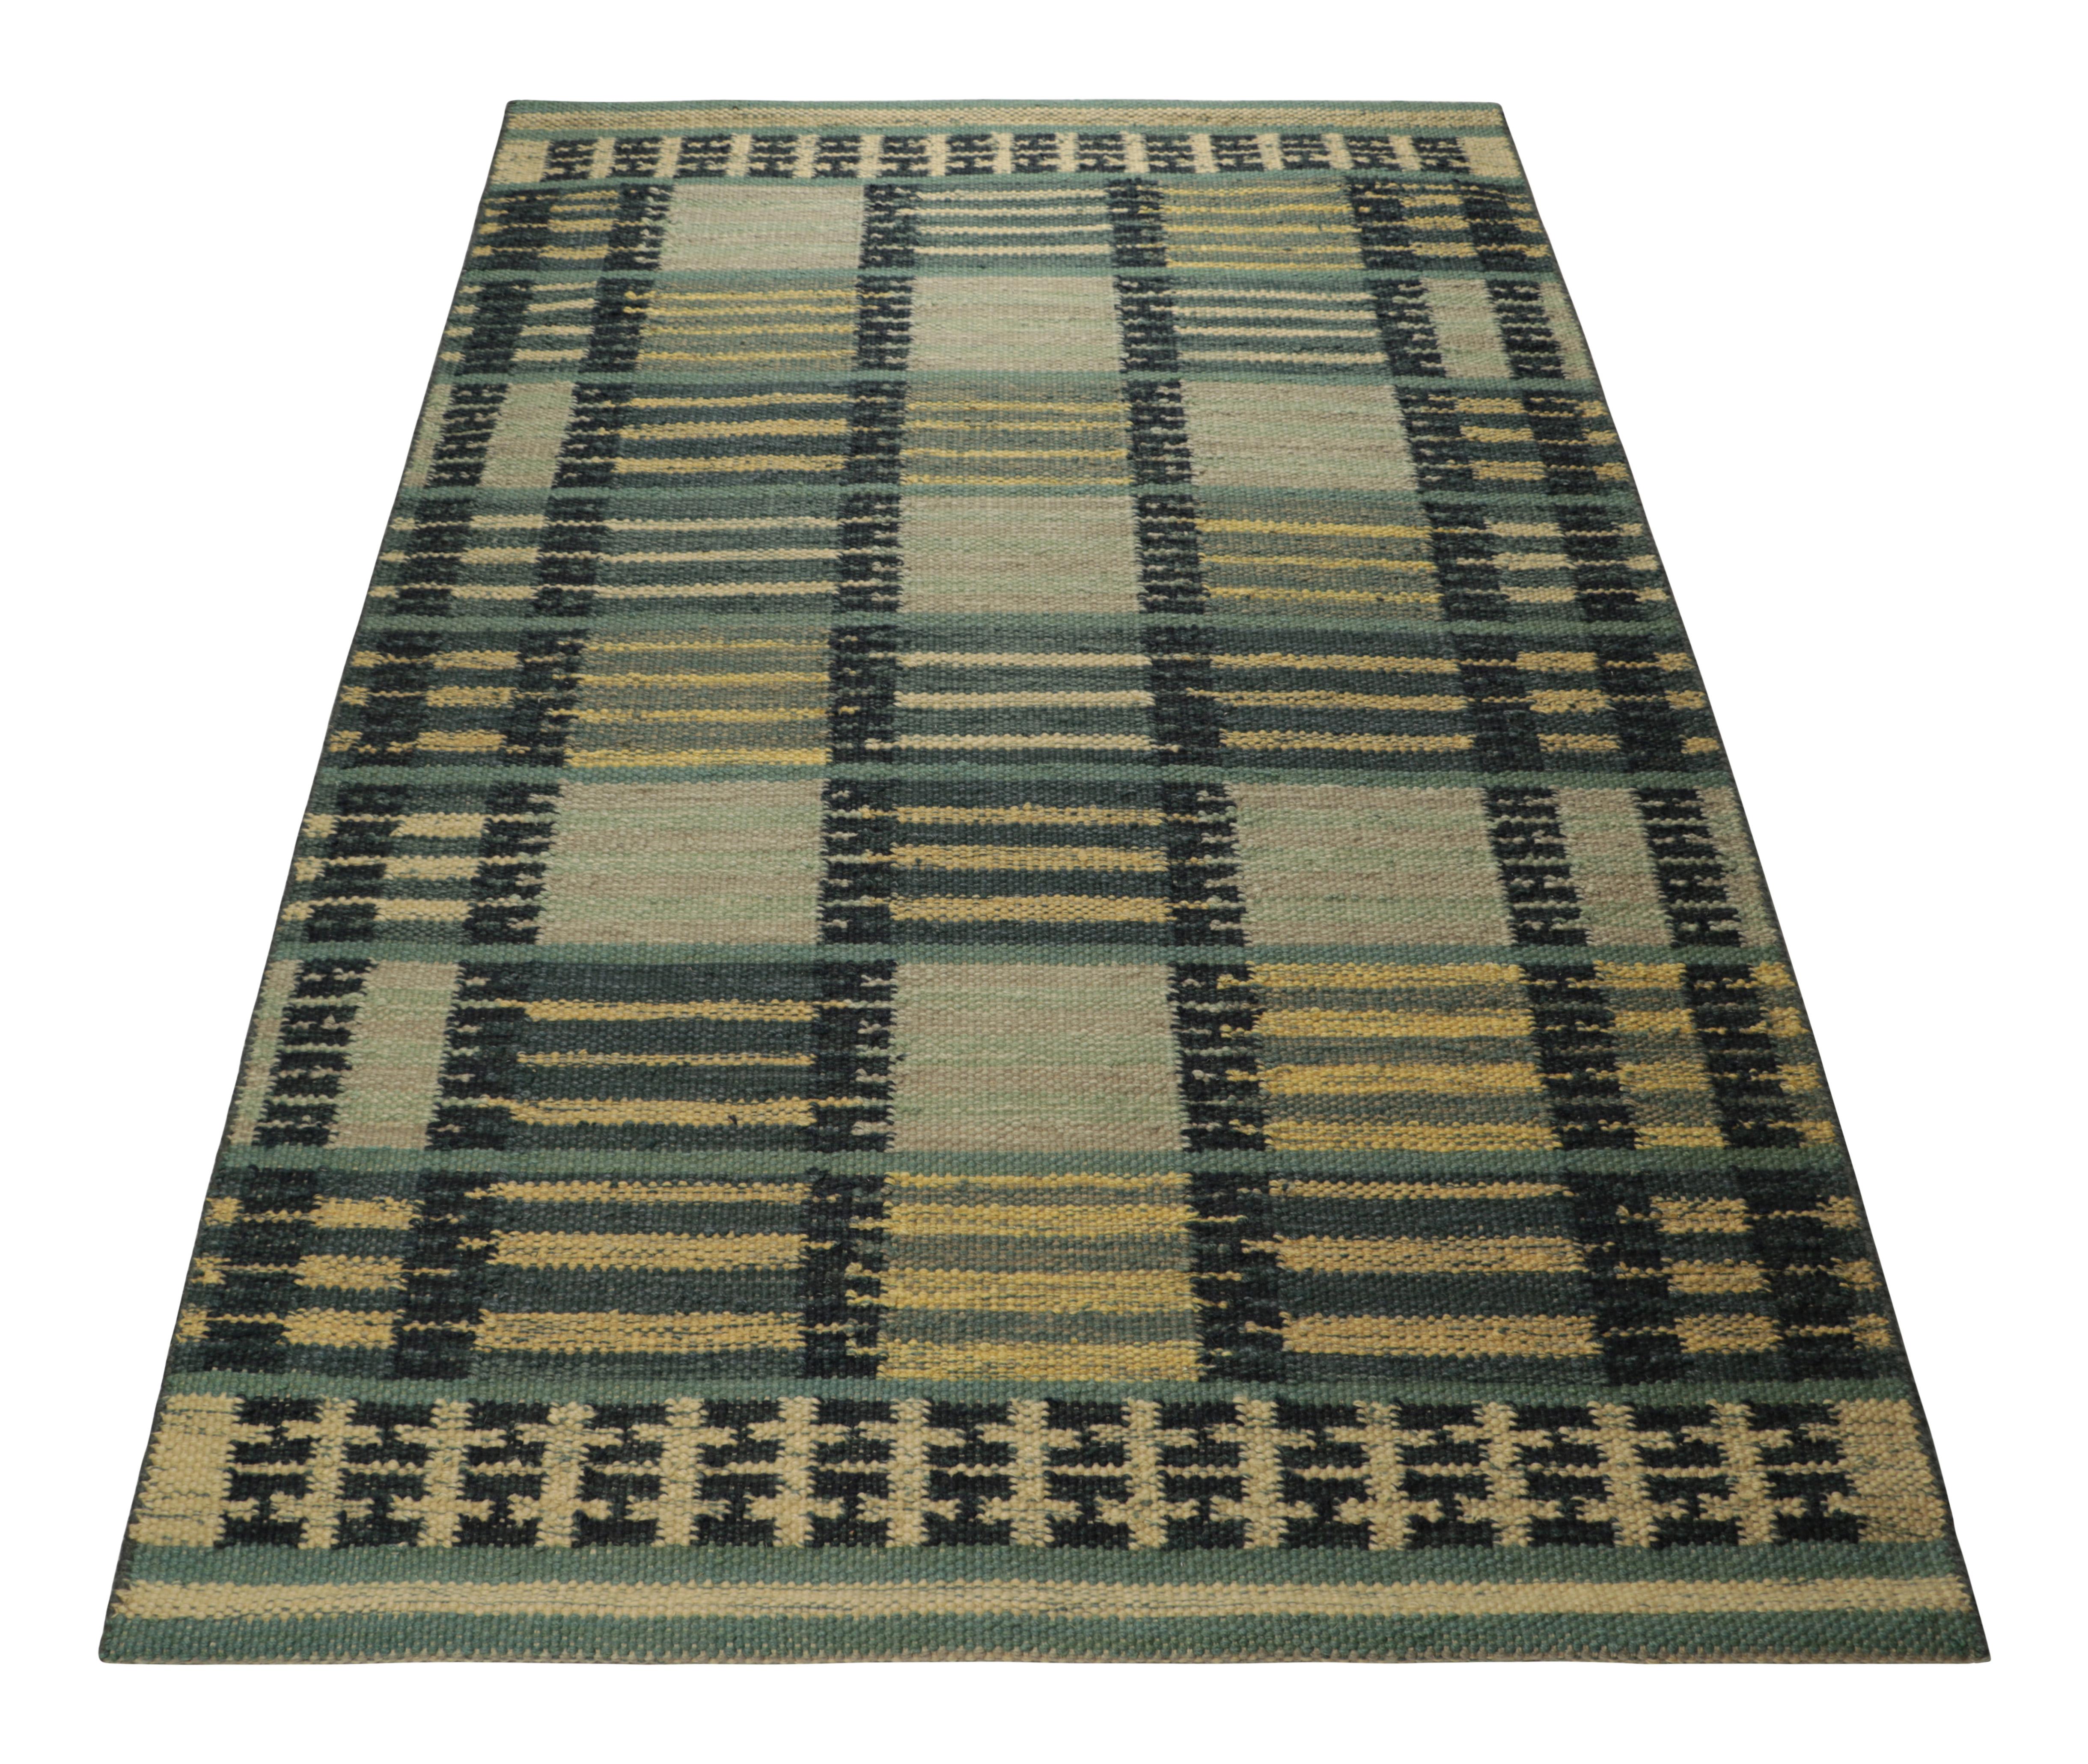 Hand-Woven Rug & Kilim’s Scandinavian Style Rug in Blue Tones, with Stripes and Patterns For Sale